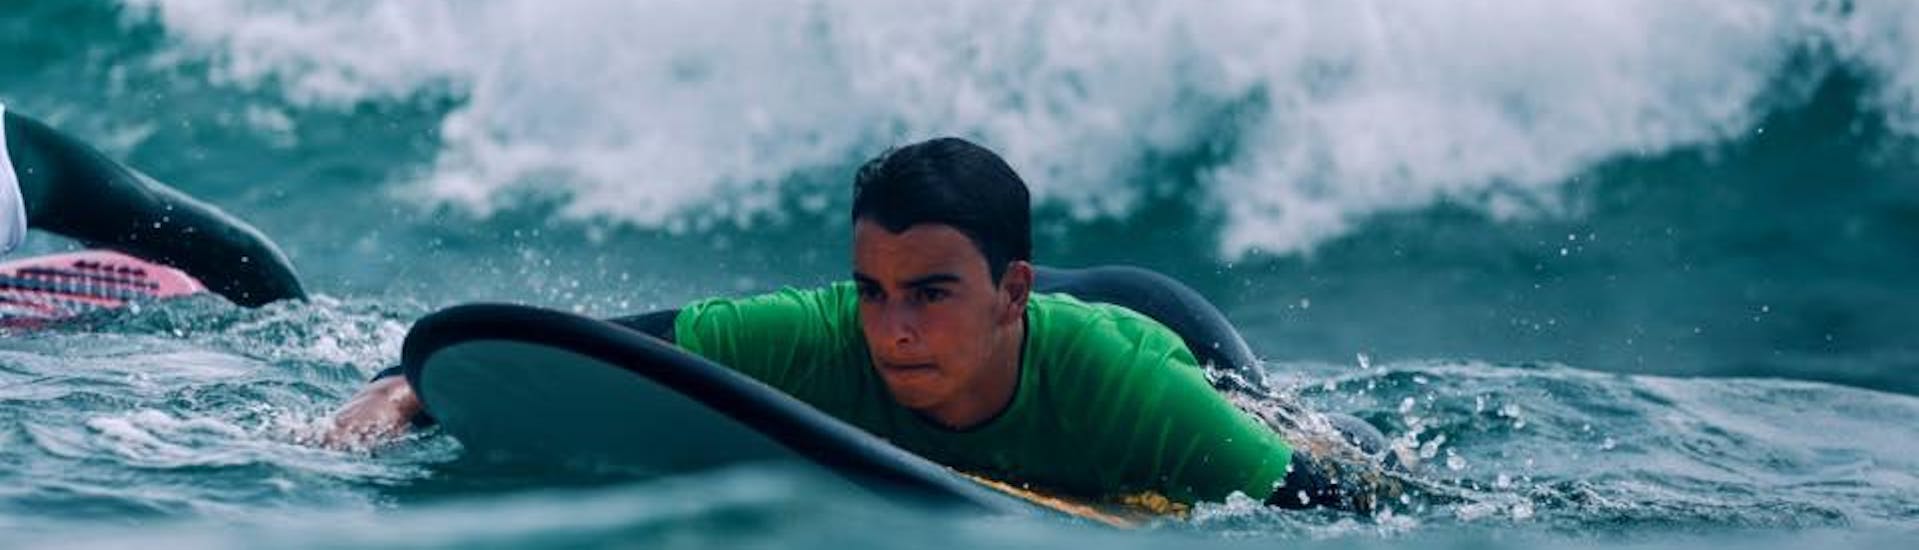 private-surfing-lessons-in-cullera---all-levels-hero